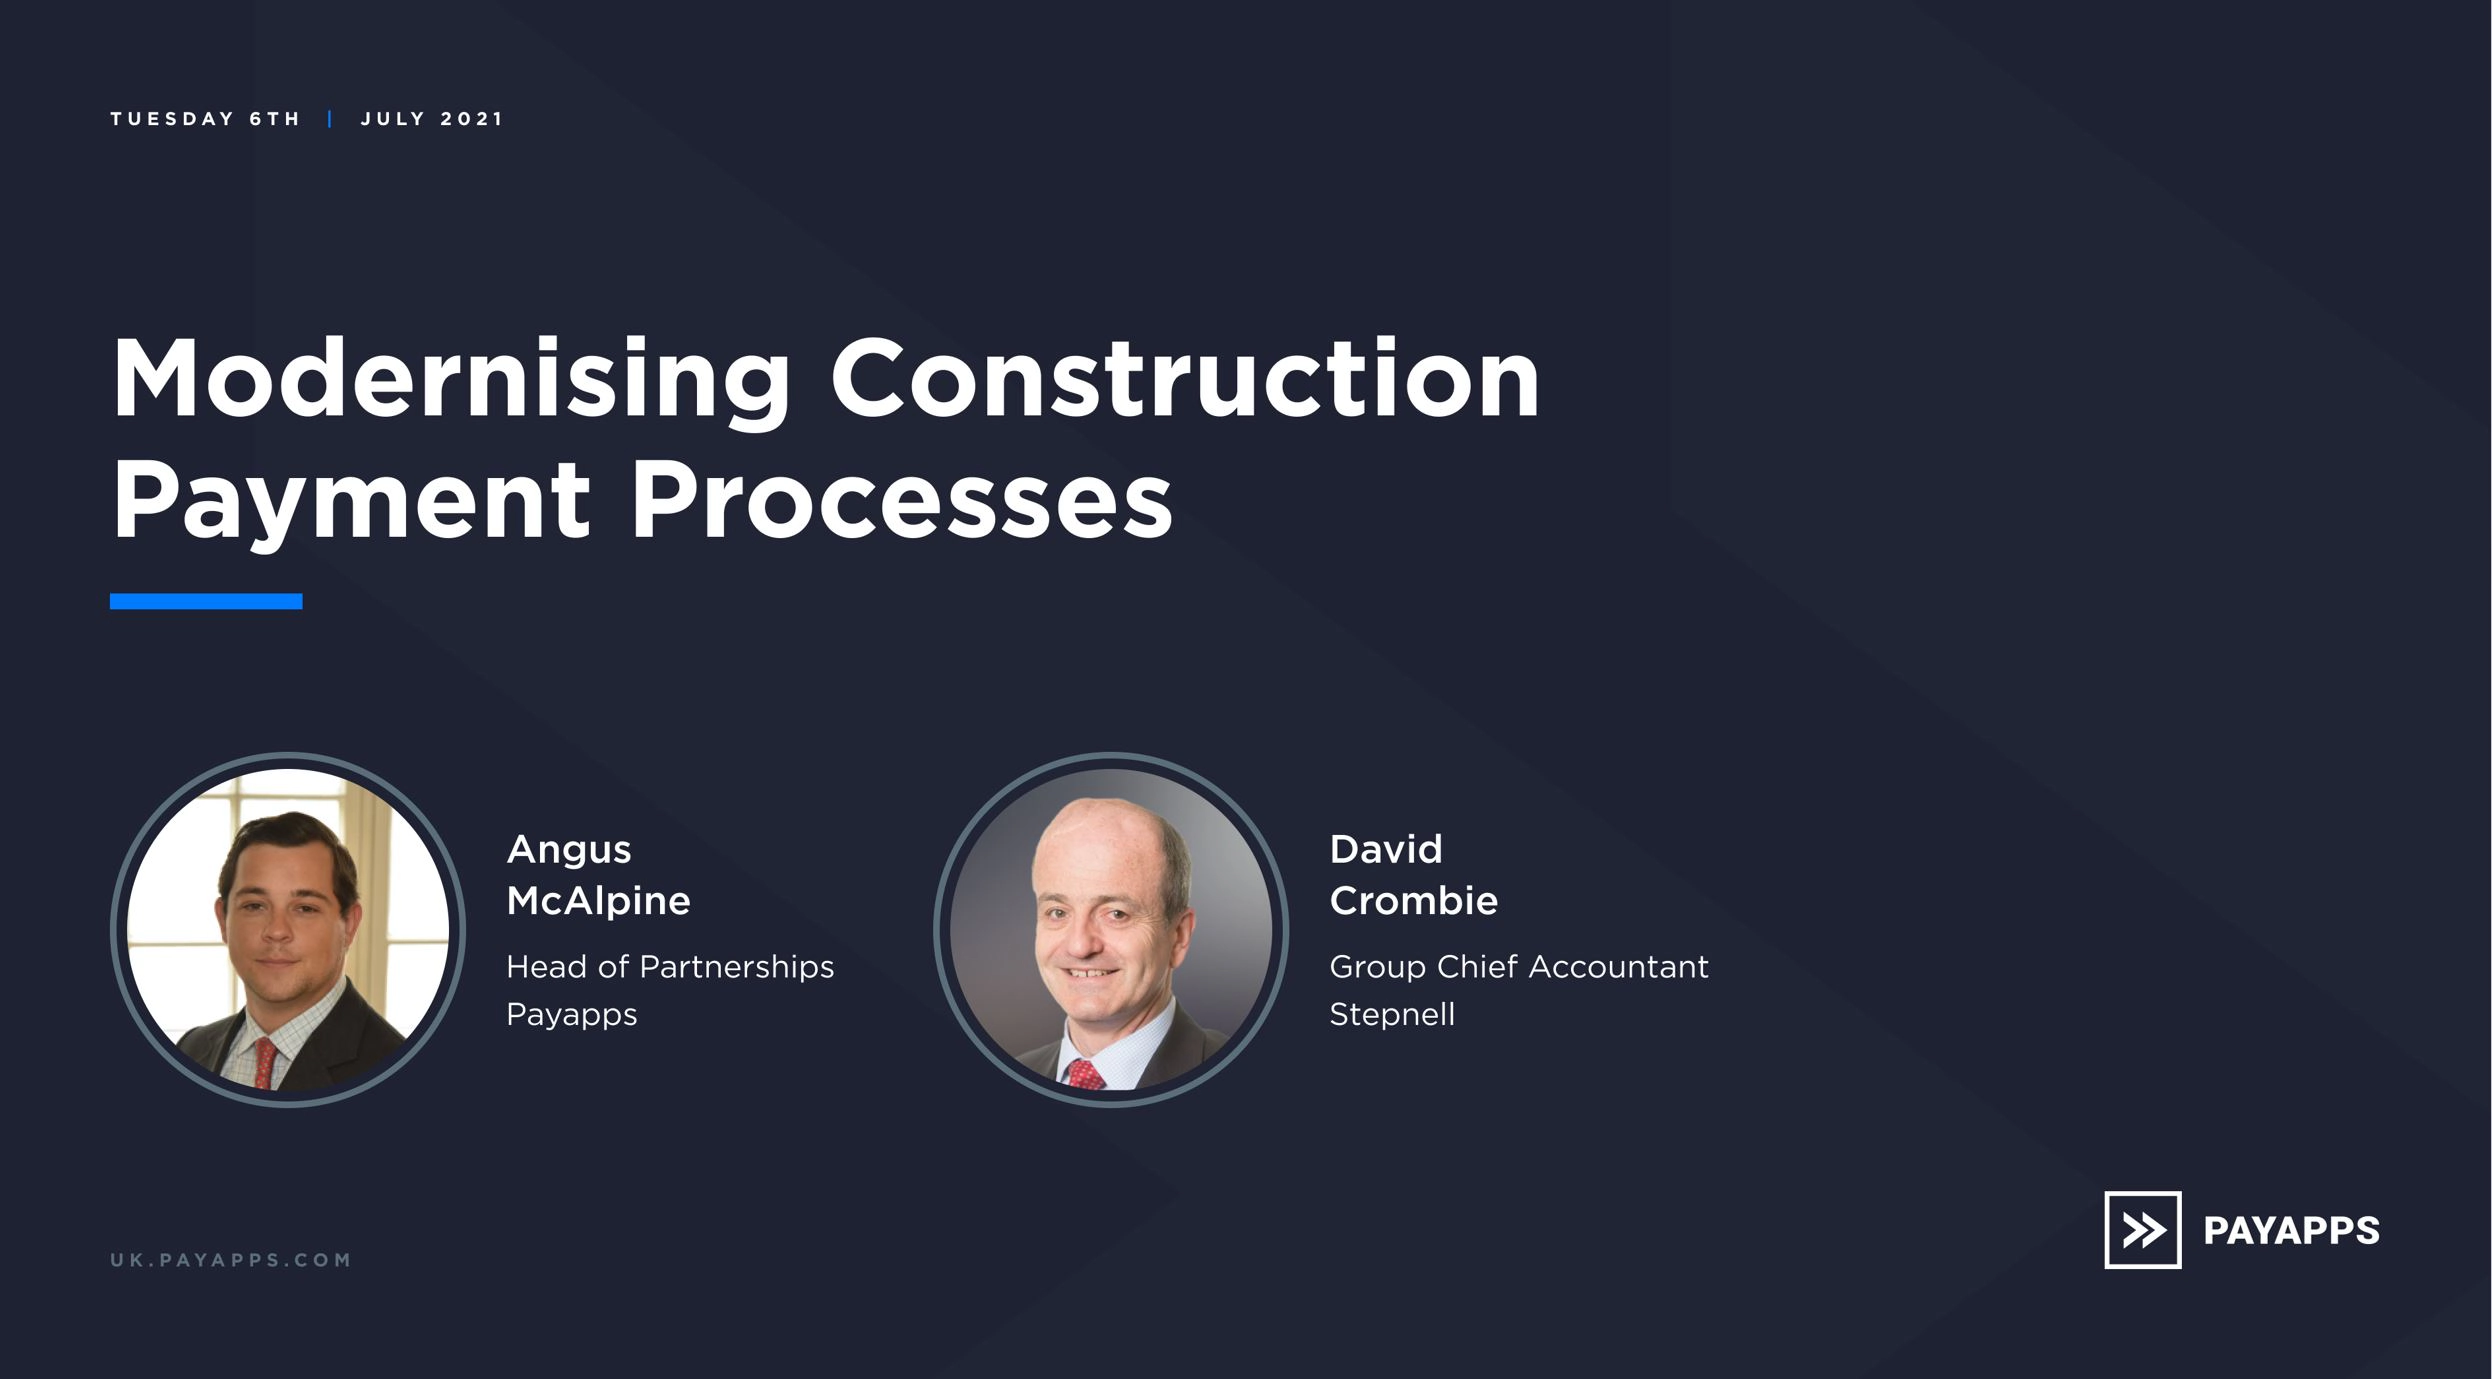 WATCH - Webinar Recording with the NFB - Modernising Construction Payment Processes